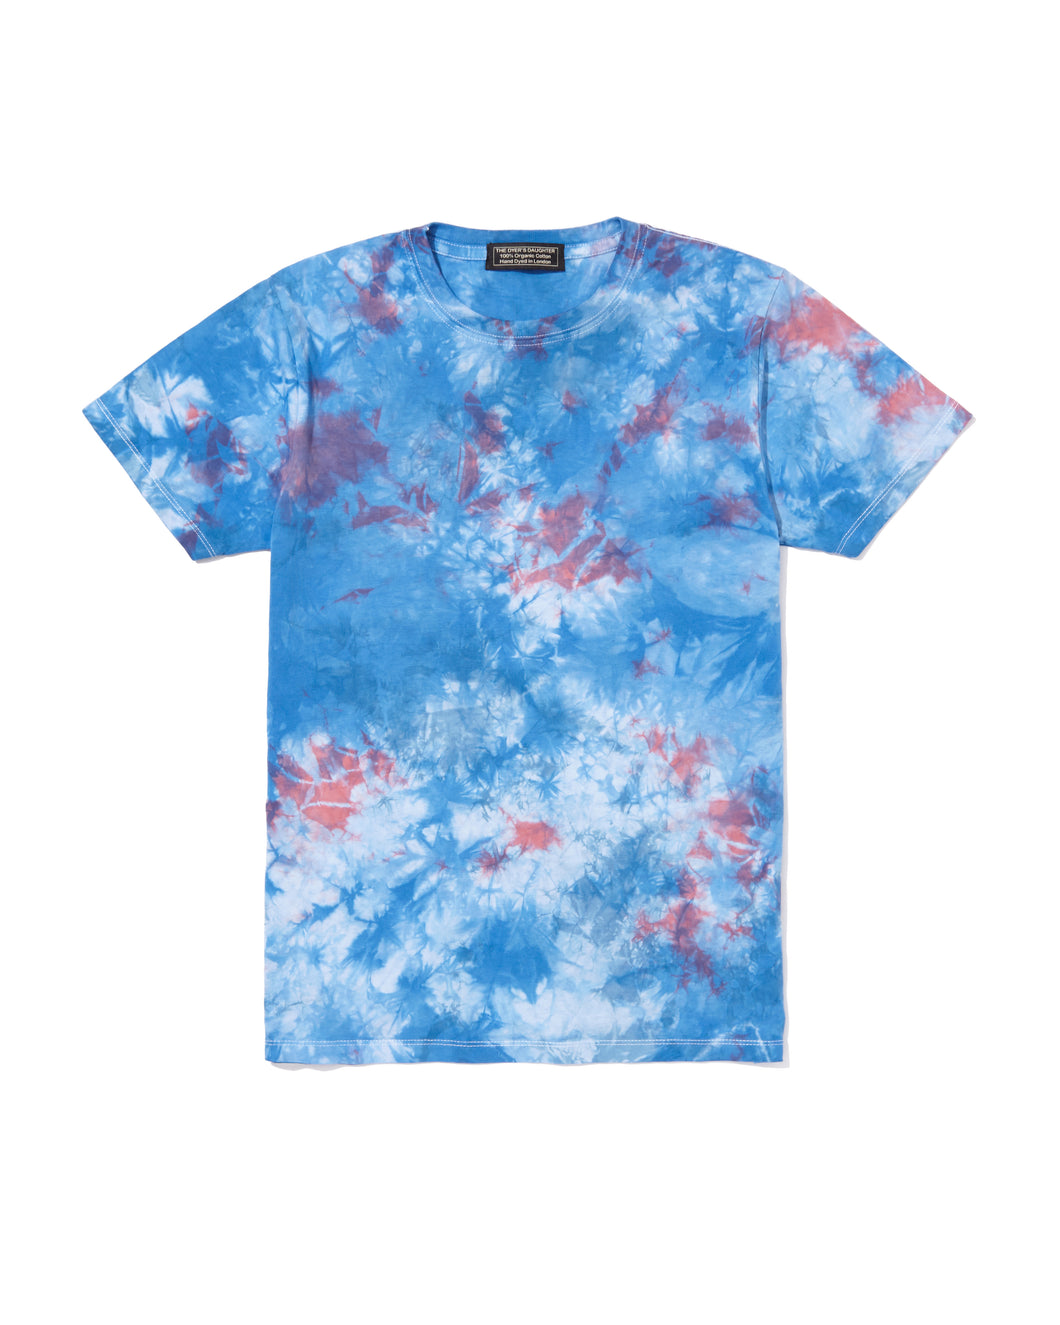 HIGH NOON Premium Organic Long-Sleeved Tie-Dyed T-Shirt